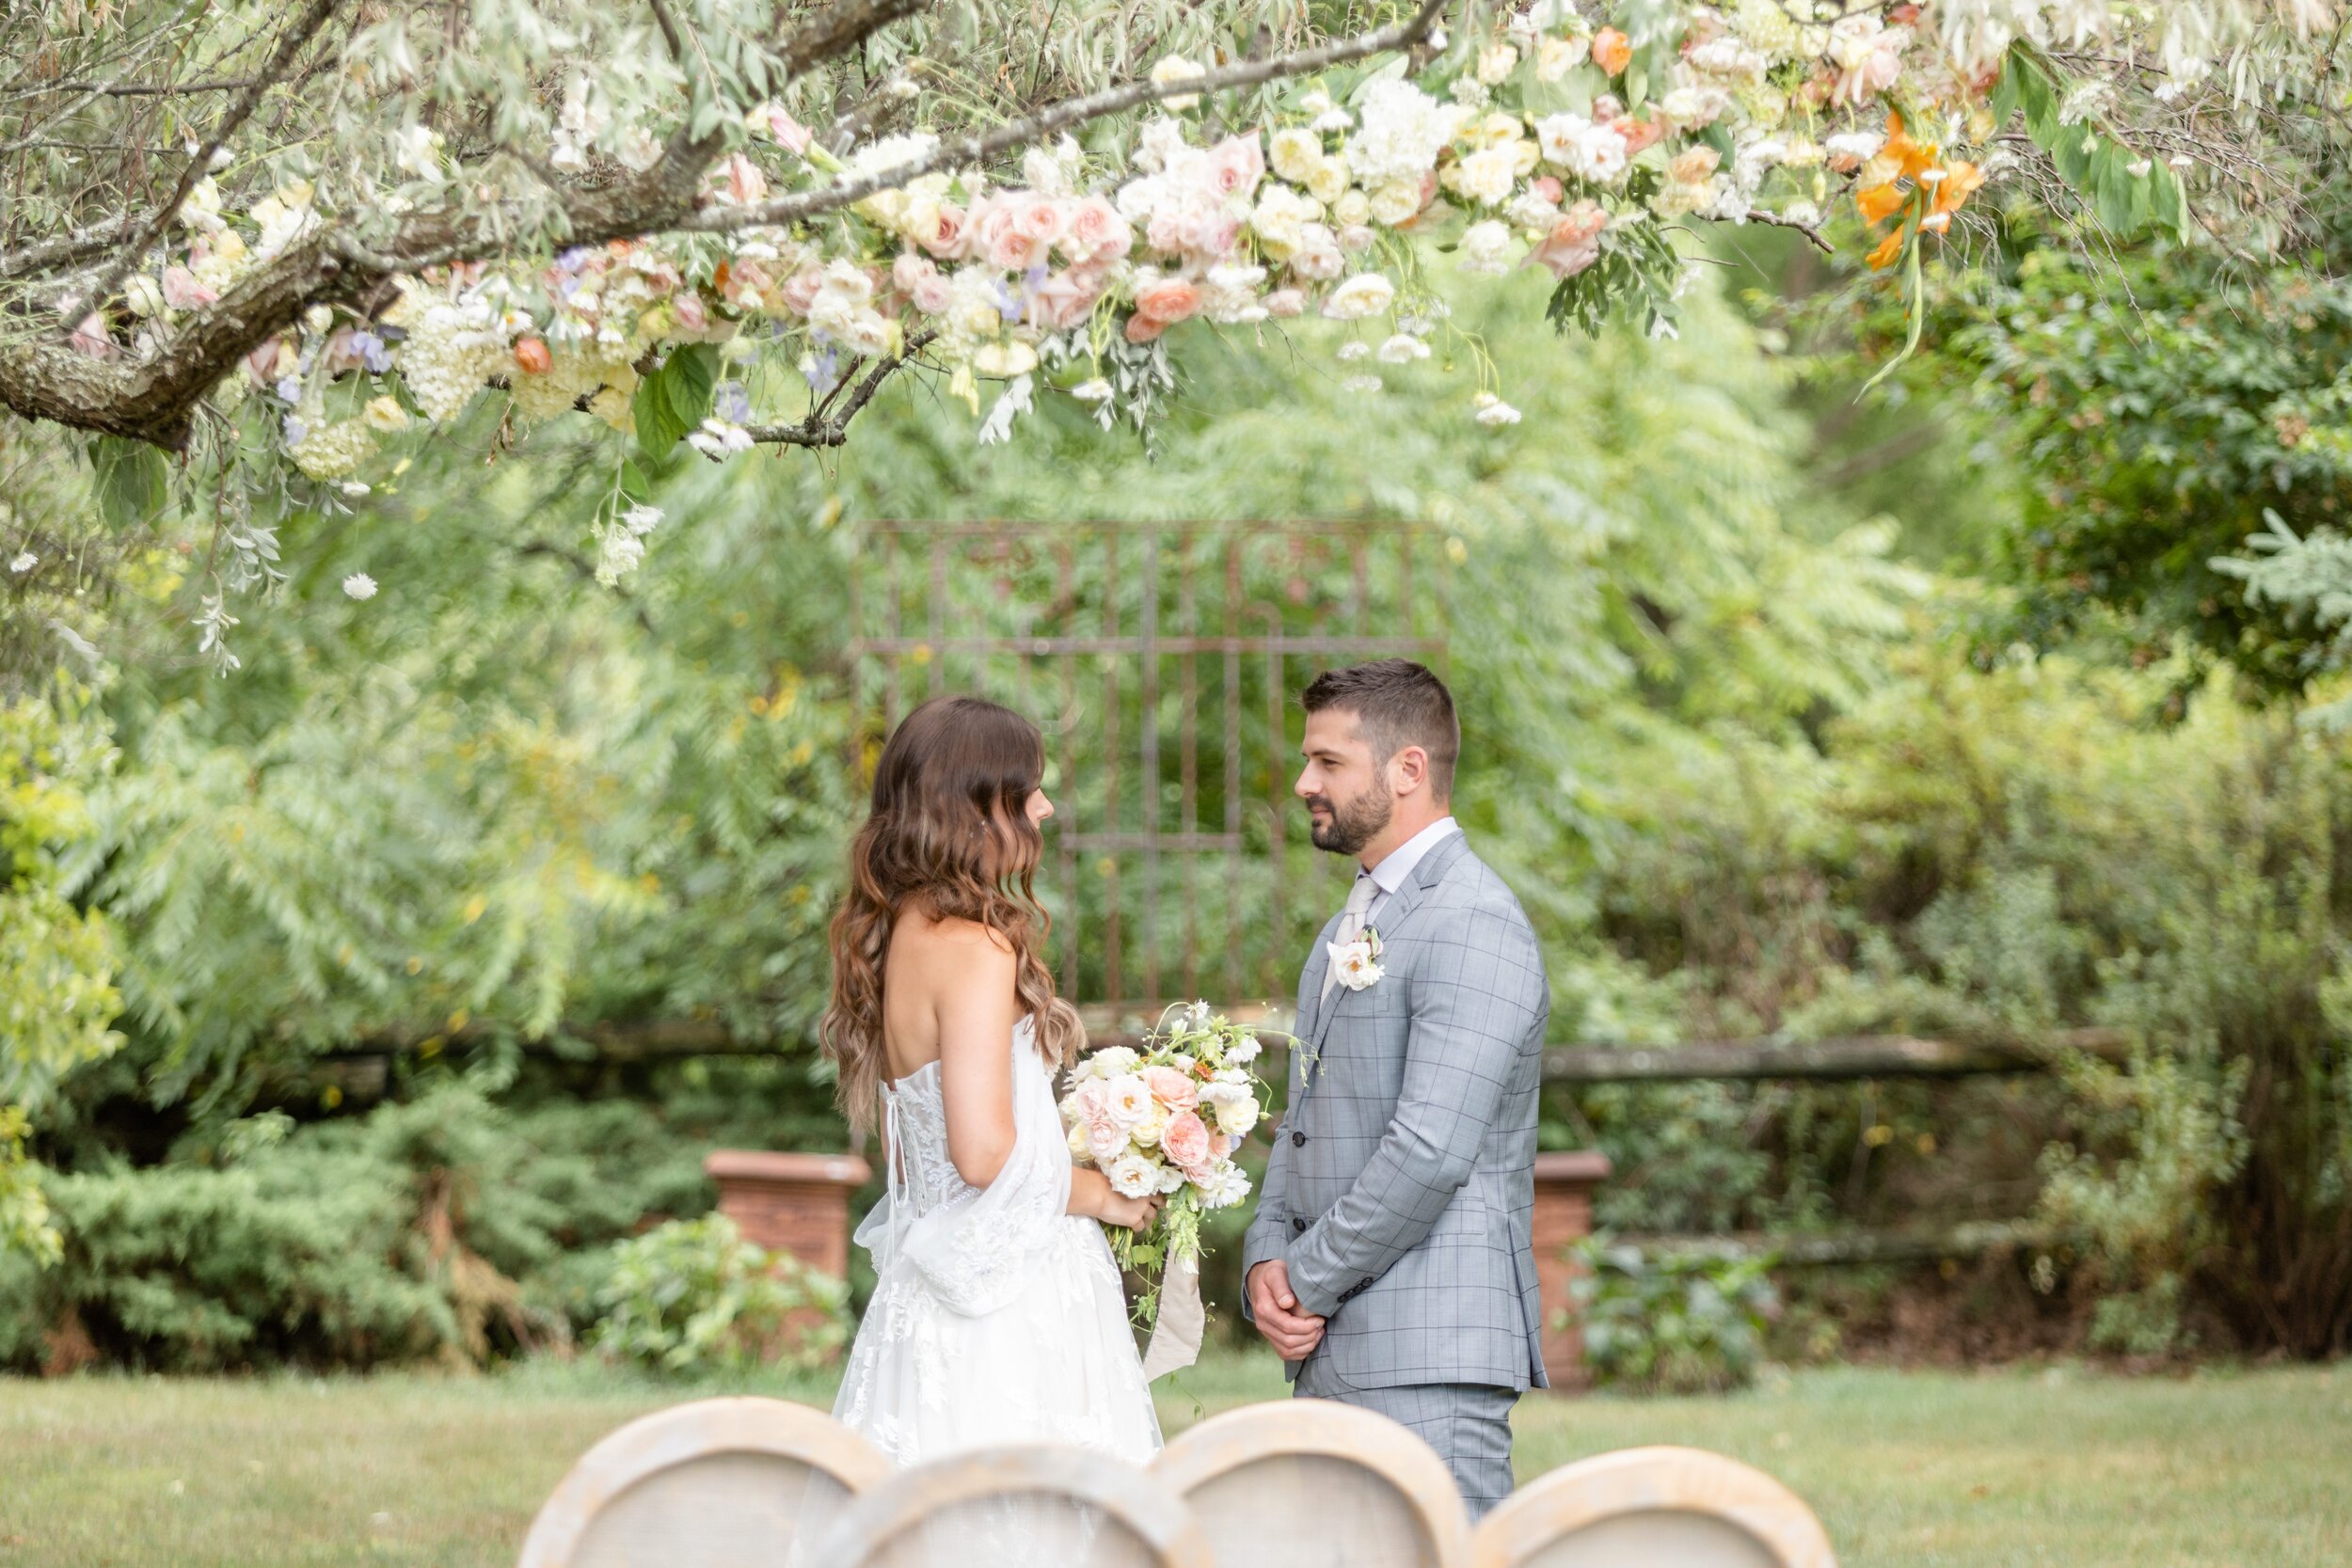 Delicate Luxe Micro-Wedding Inspired by Amalfis Lush, Romantic landscapes | Dylan & Sandra Photography -89.jpg